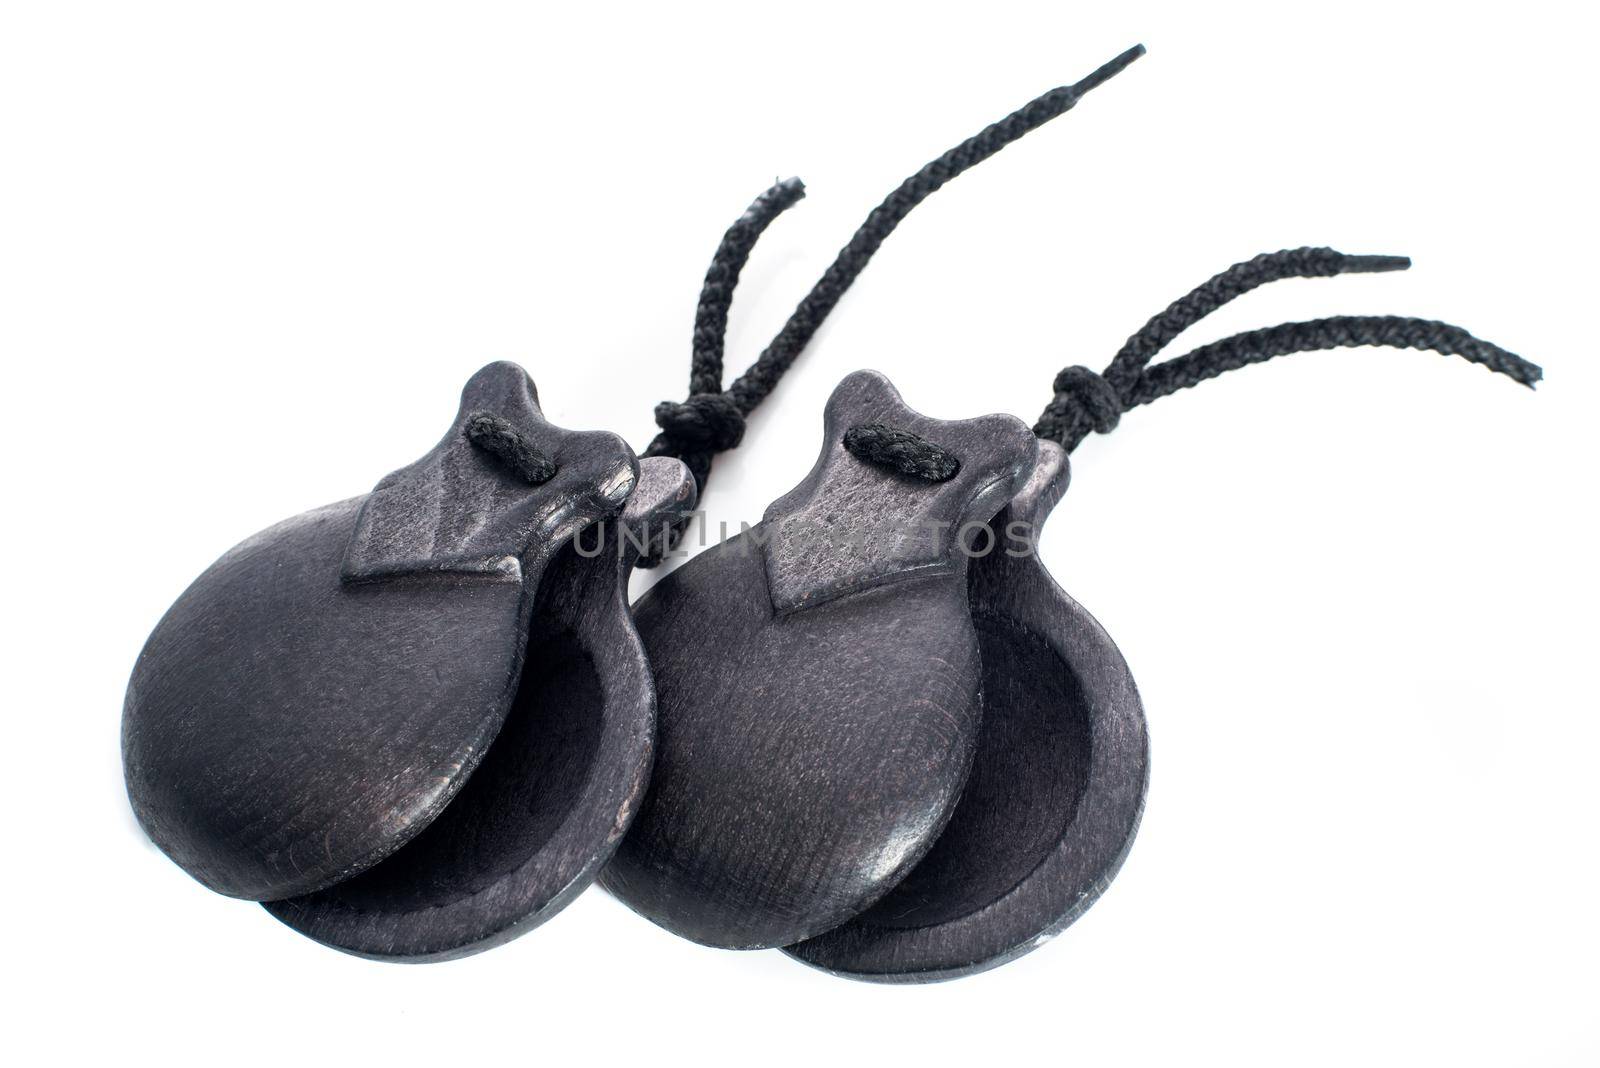 Two Spanish Castanets isolated on a white background